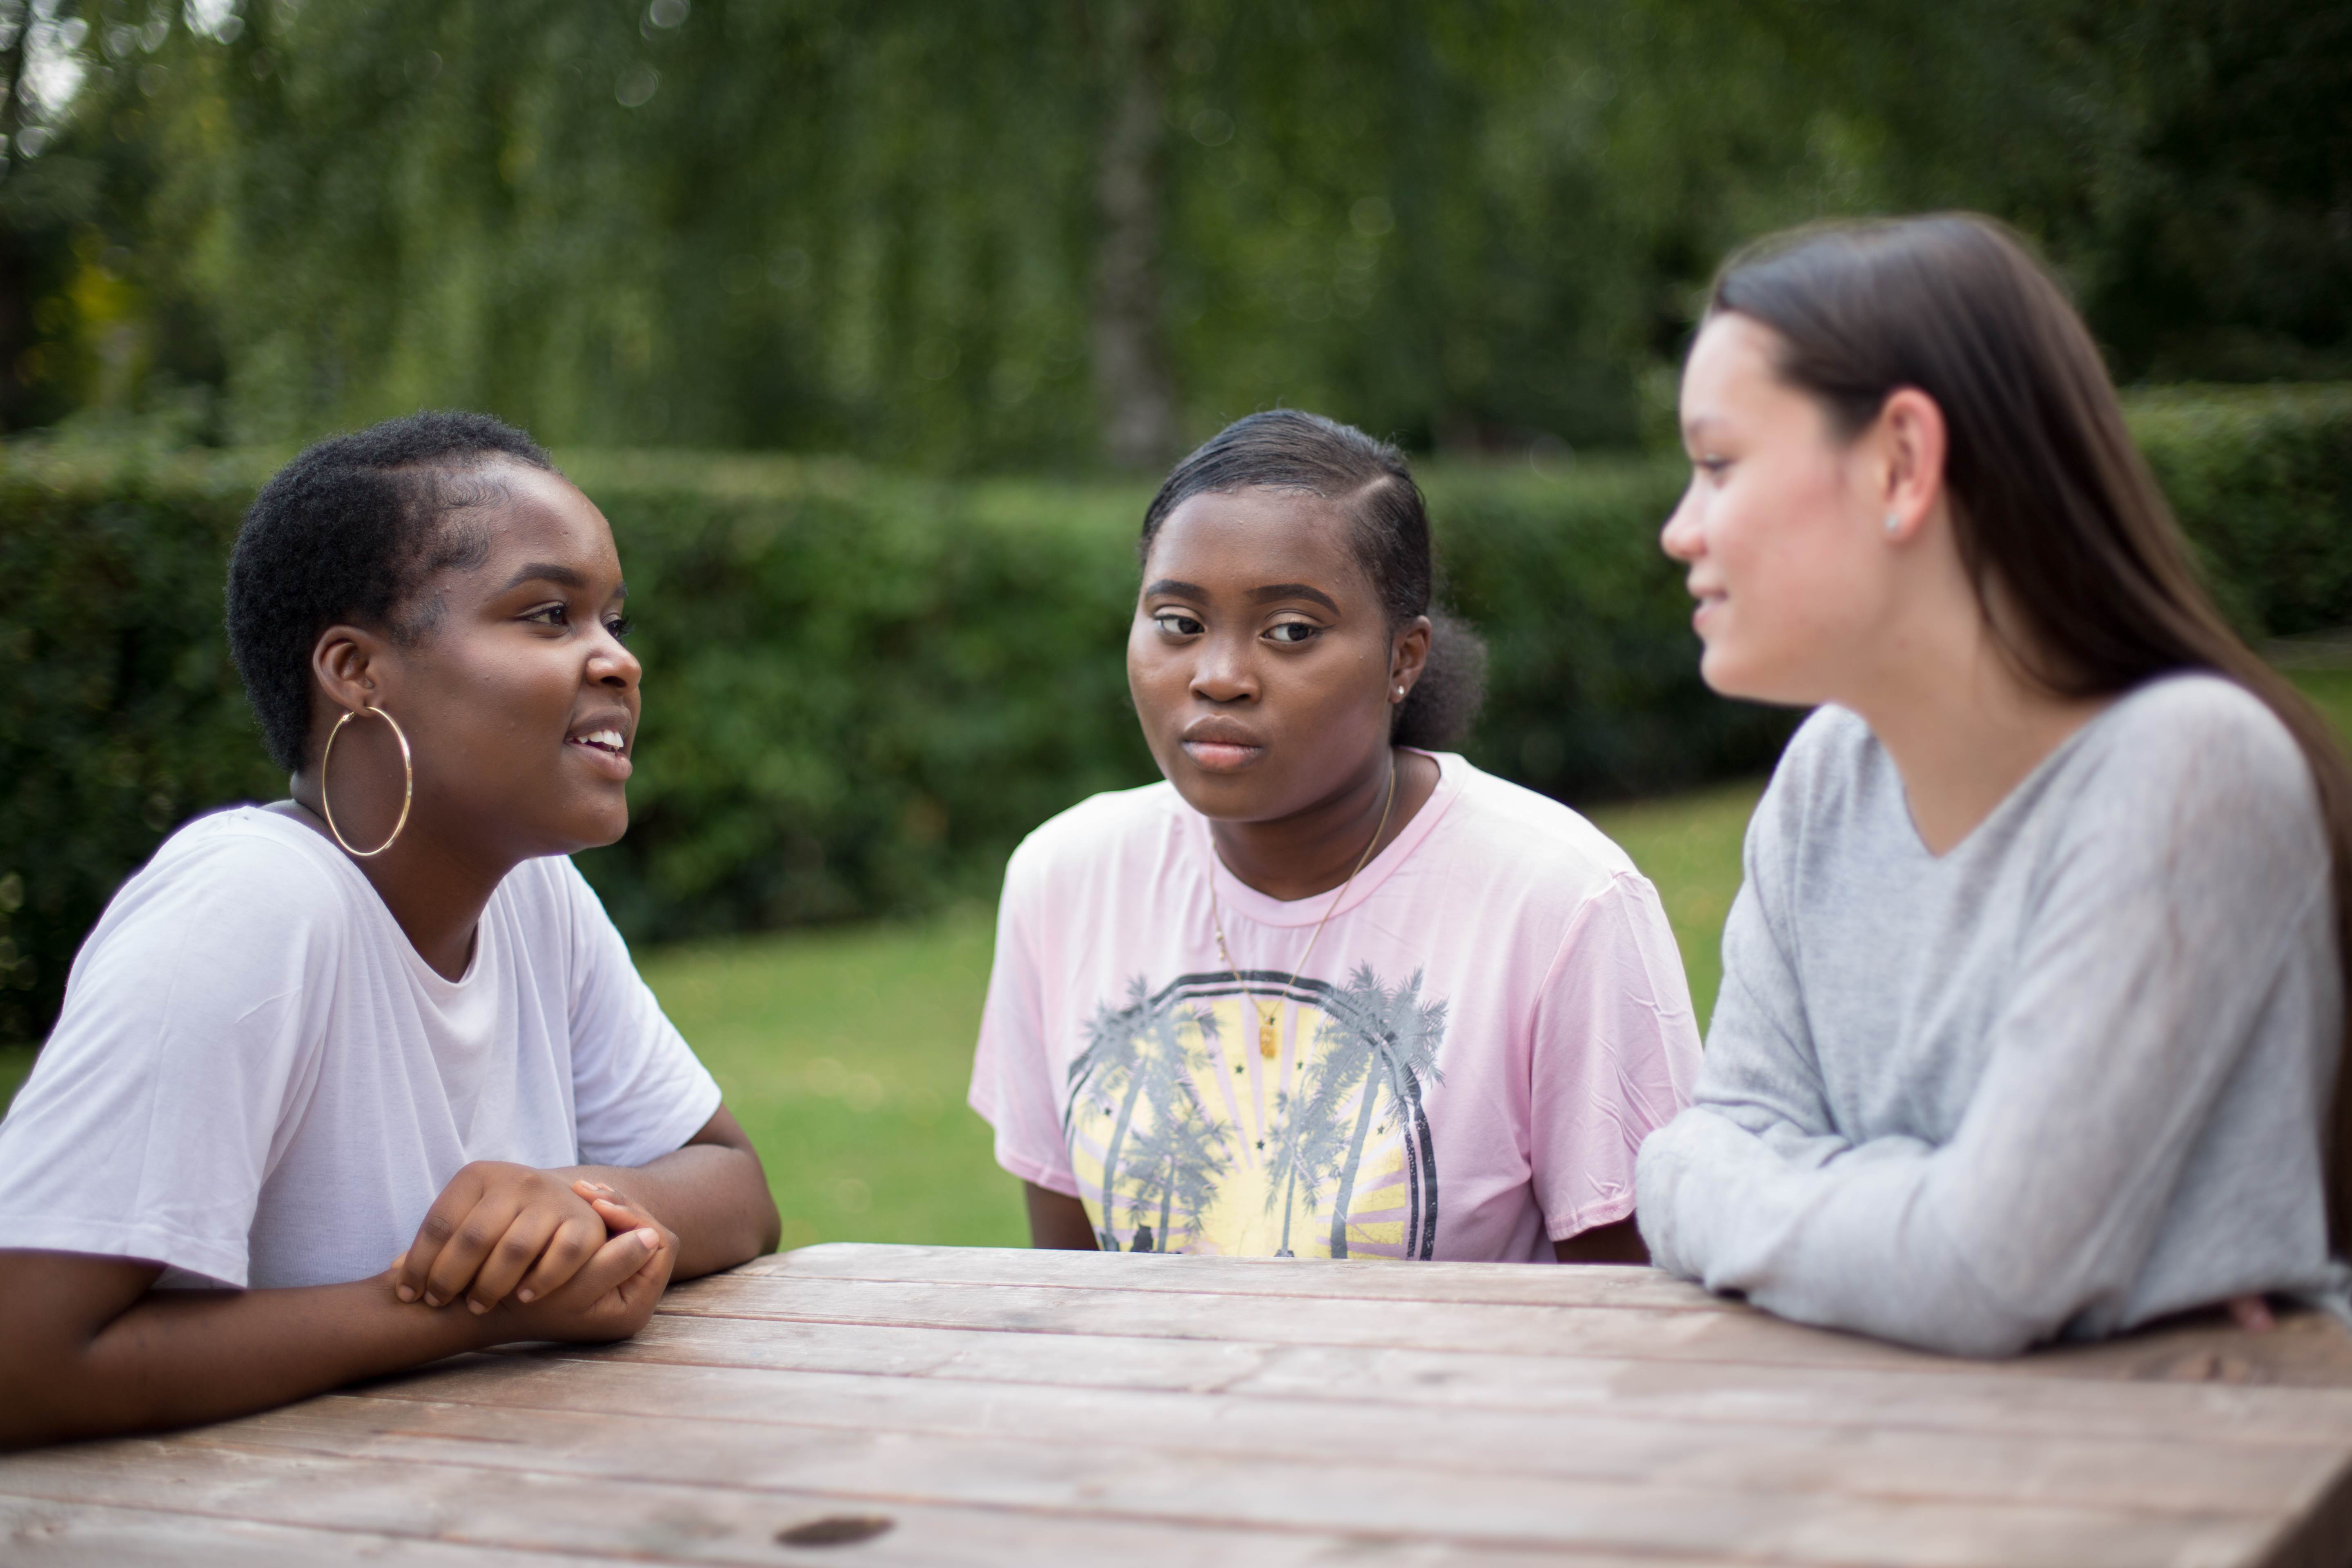 Three young people sitting at a table outdoors in a garden. They are having a conversation. Two are smiling, one has a neutral expression.